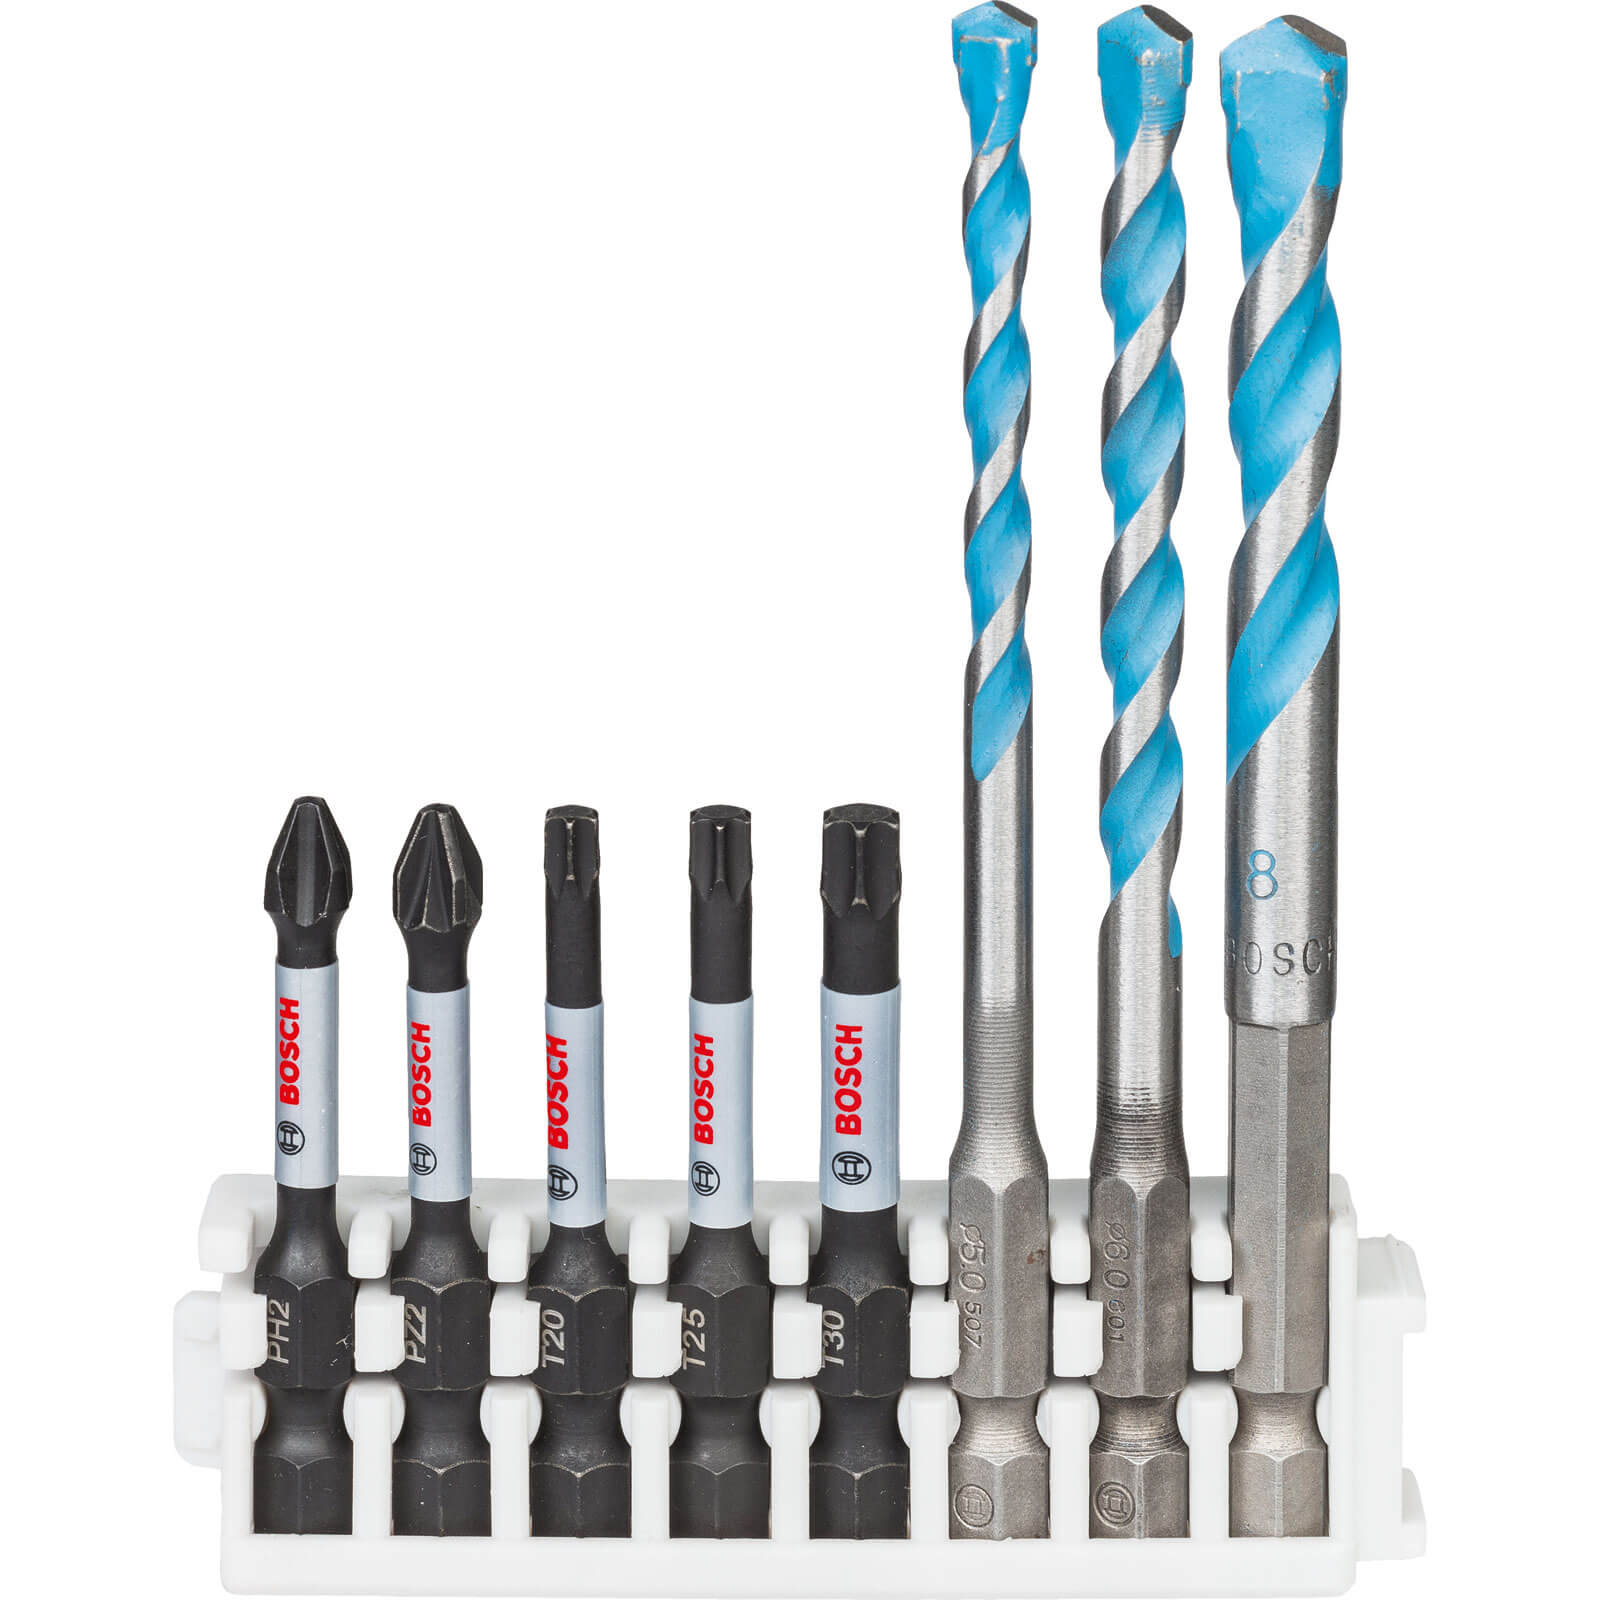 Image of Bosch 8 Piece Impact Screwdriver and Multi Construction Drill Bit Set